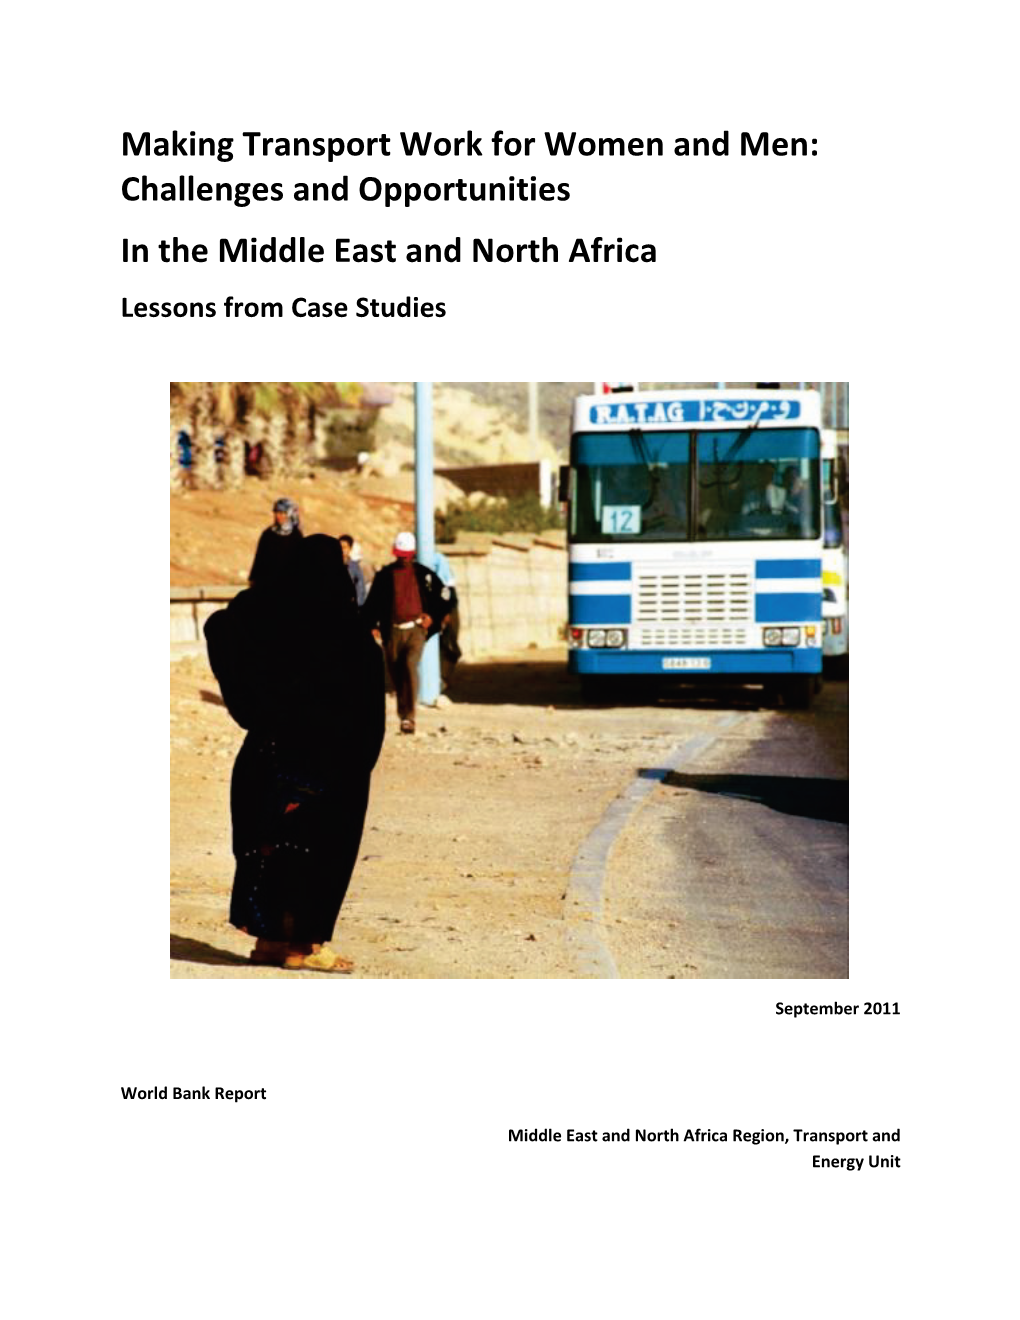 Making Transport Work for Women and Men: Challenges and Opportunities in the Middle East and North Africa